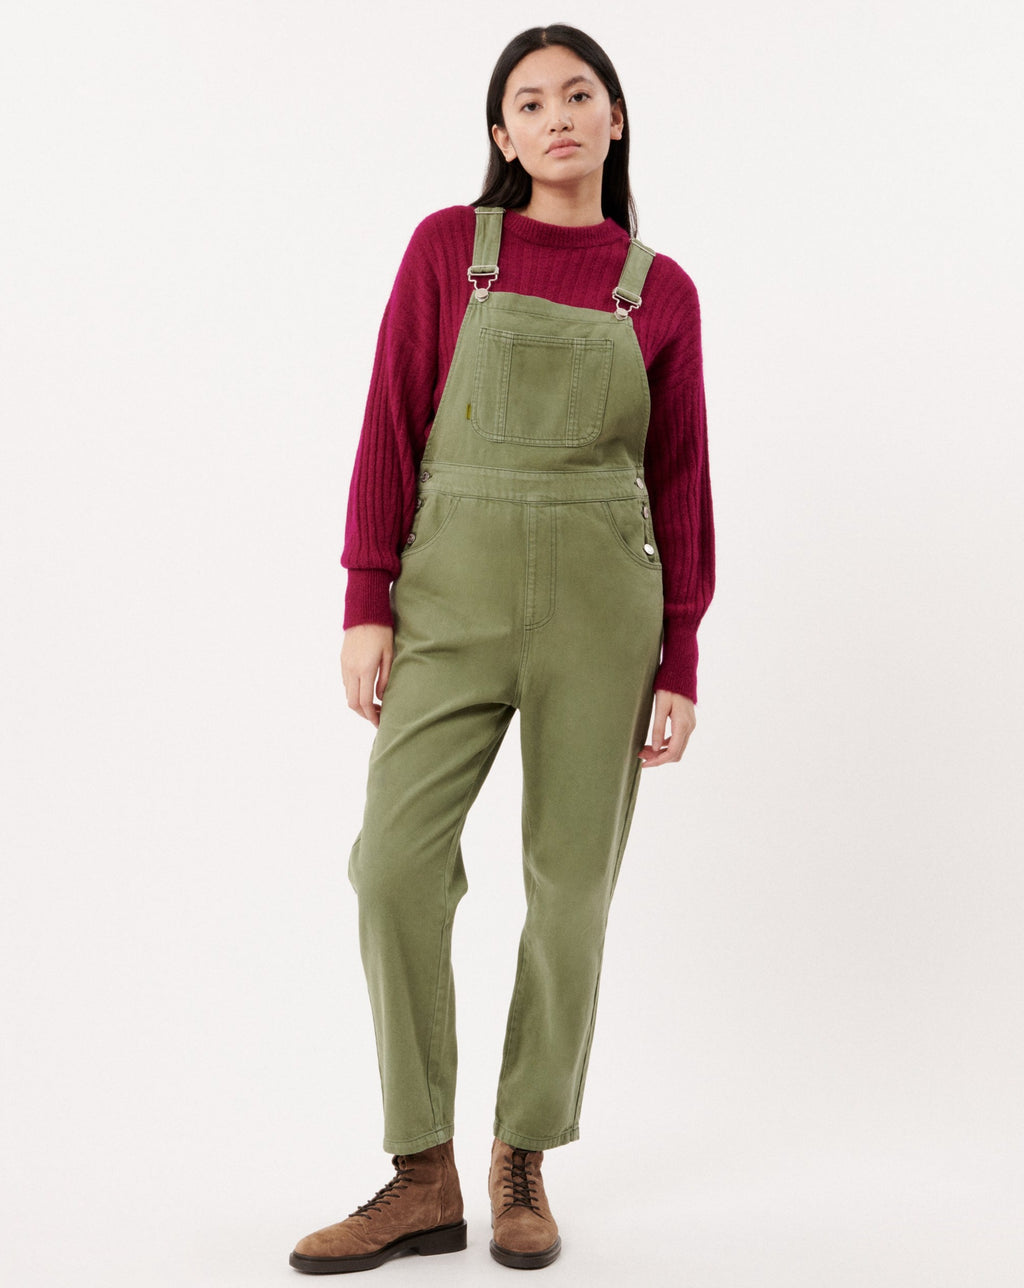 FRNCH - Loue Dungarees